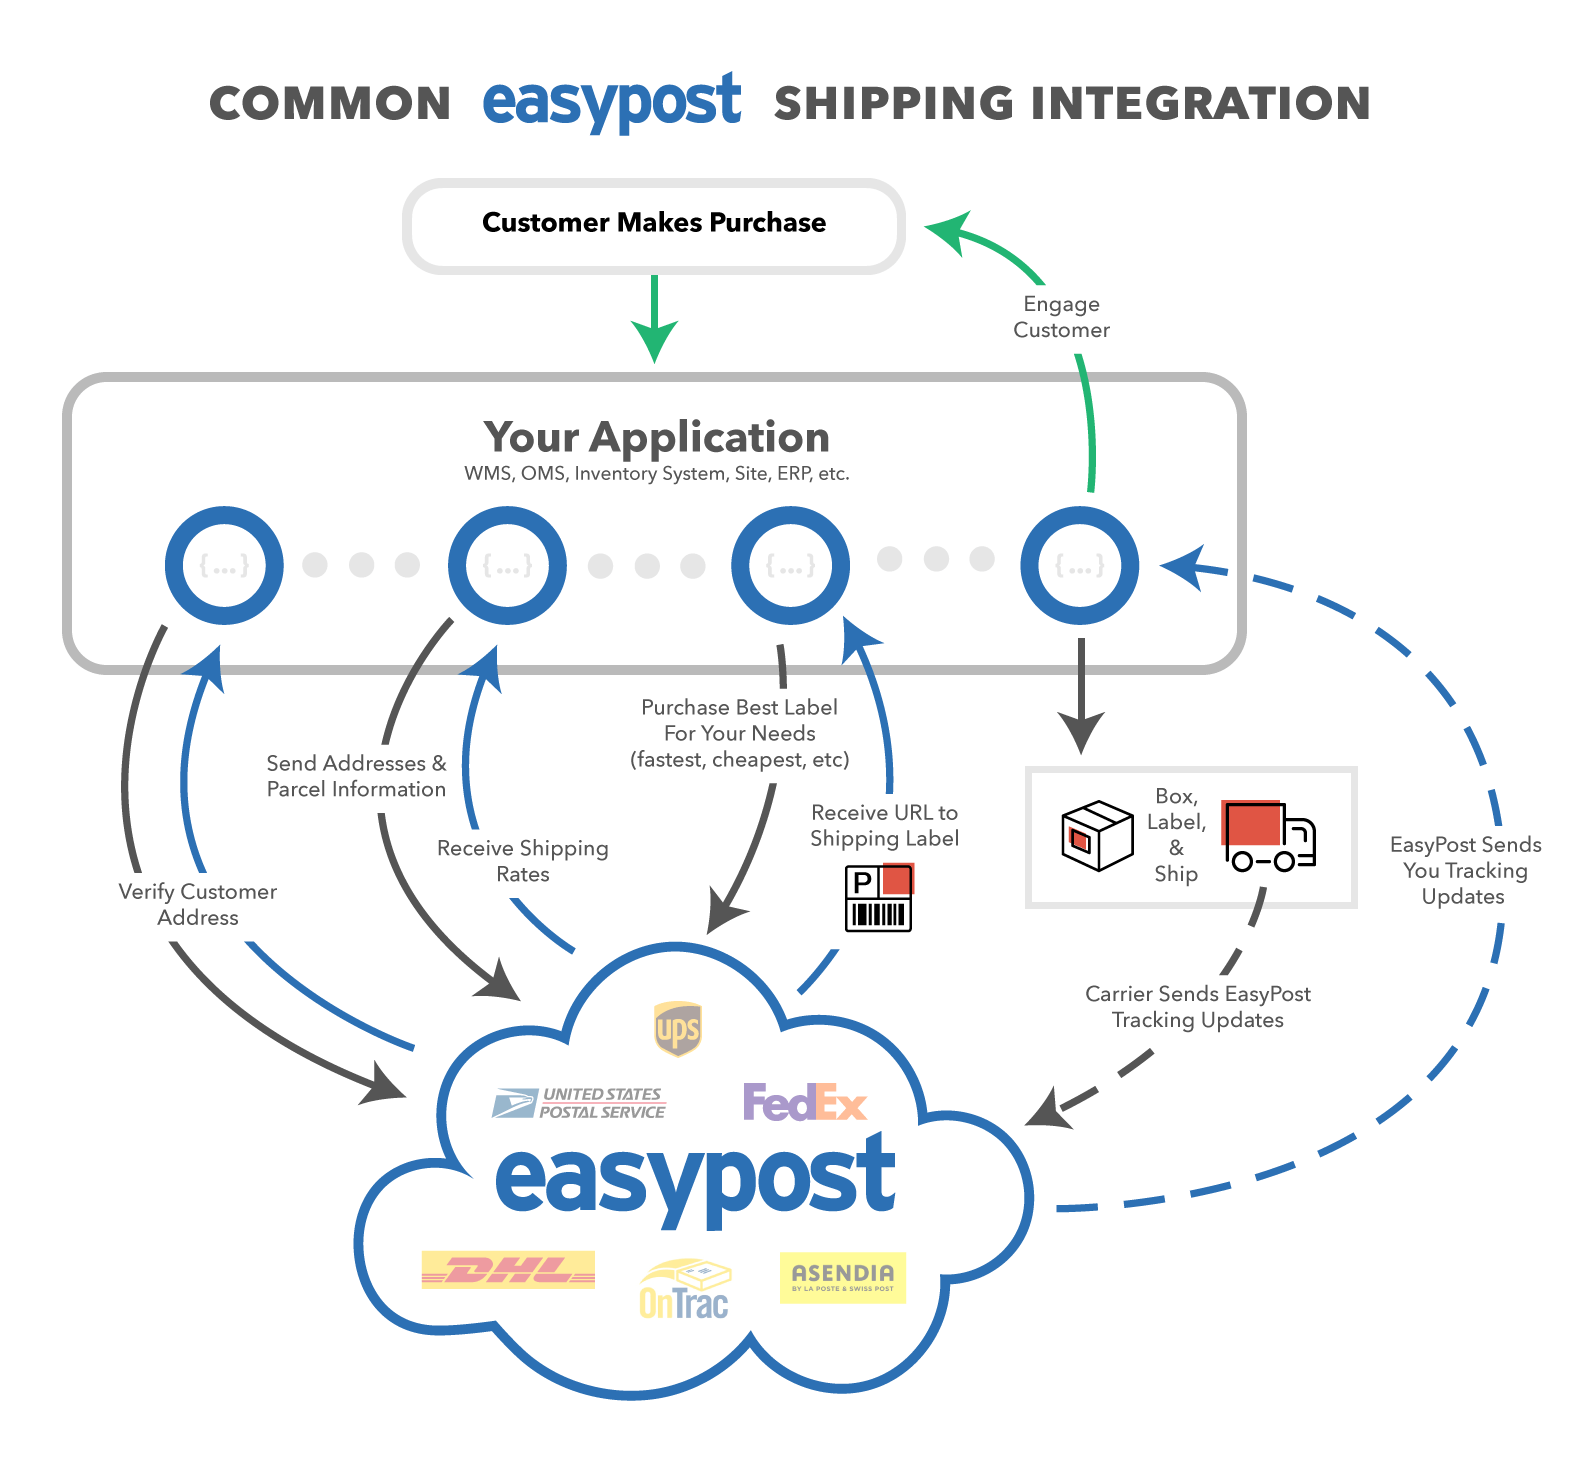 A diagram showing a common user workflow when EasyPost is integrated into that workflow